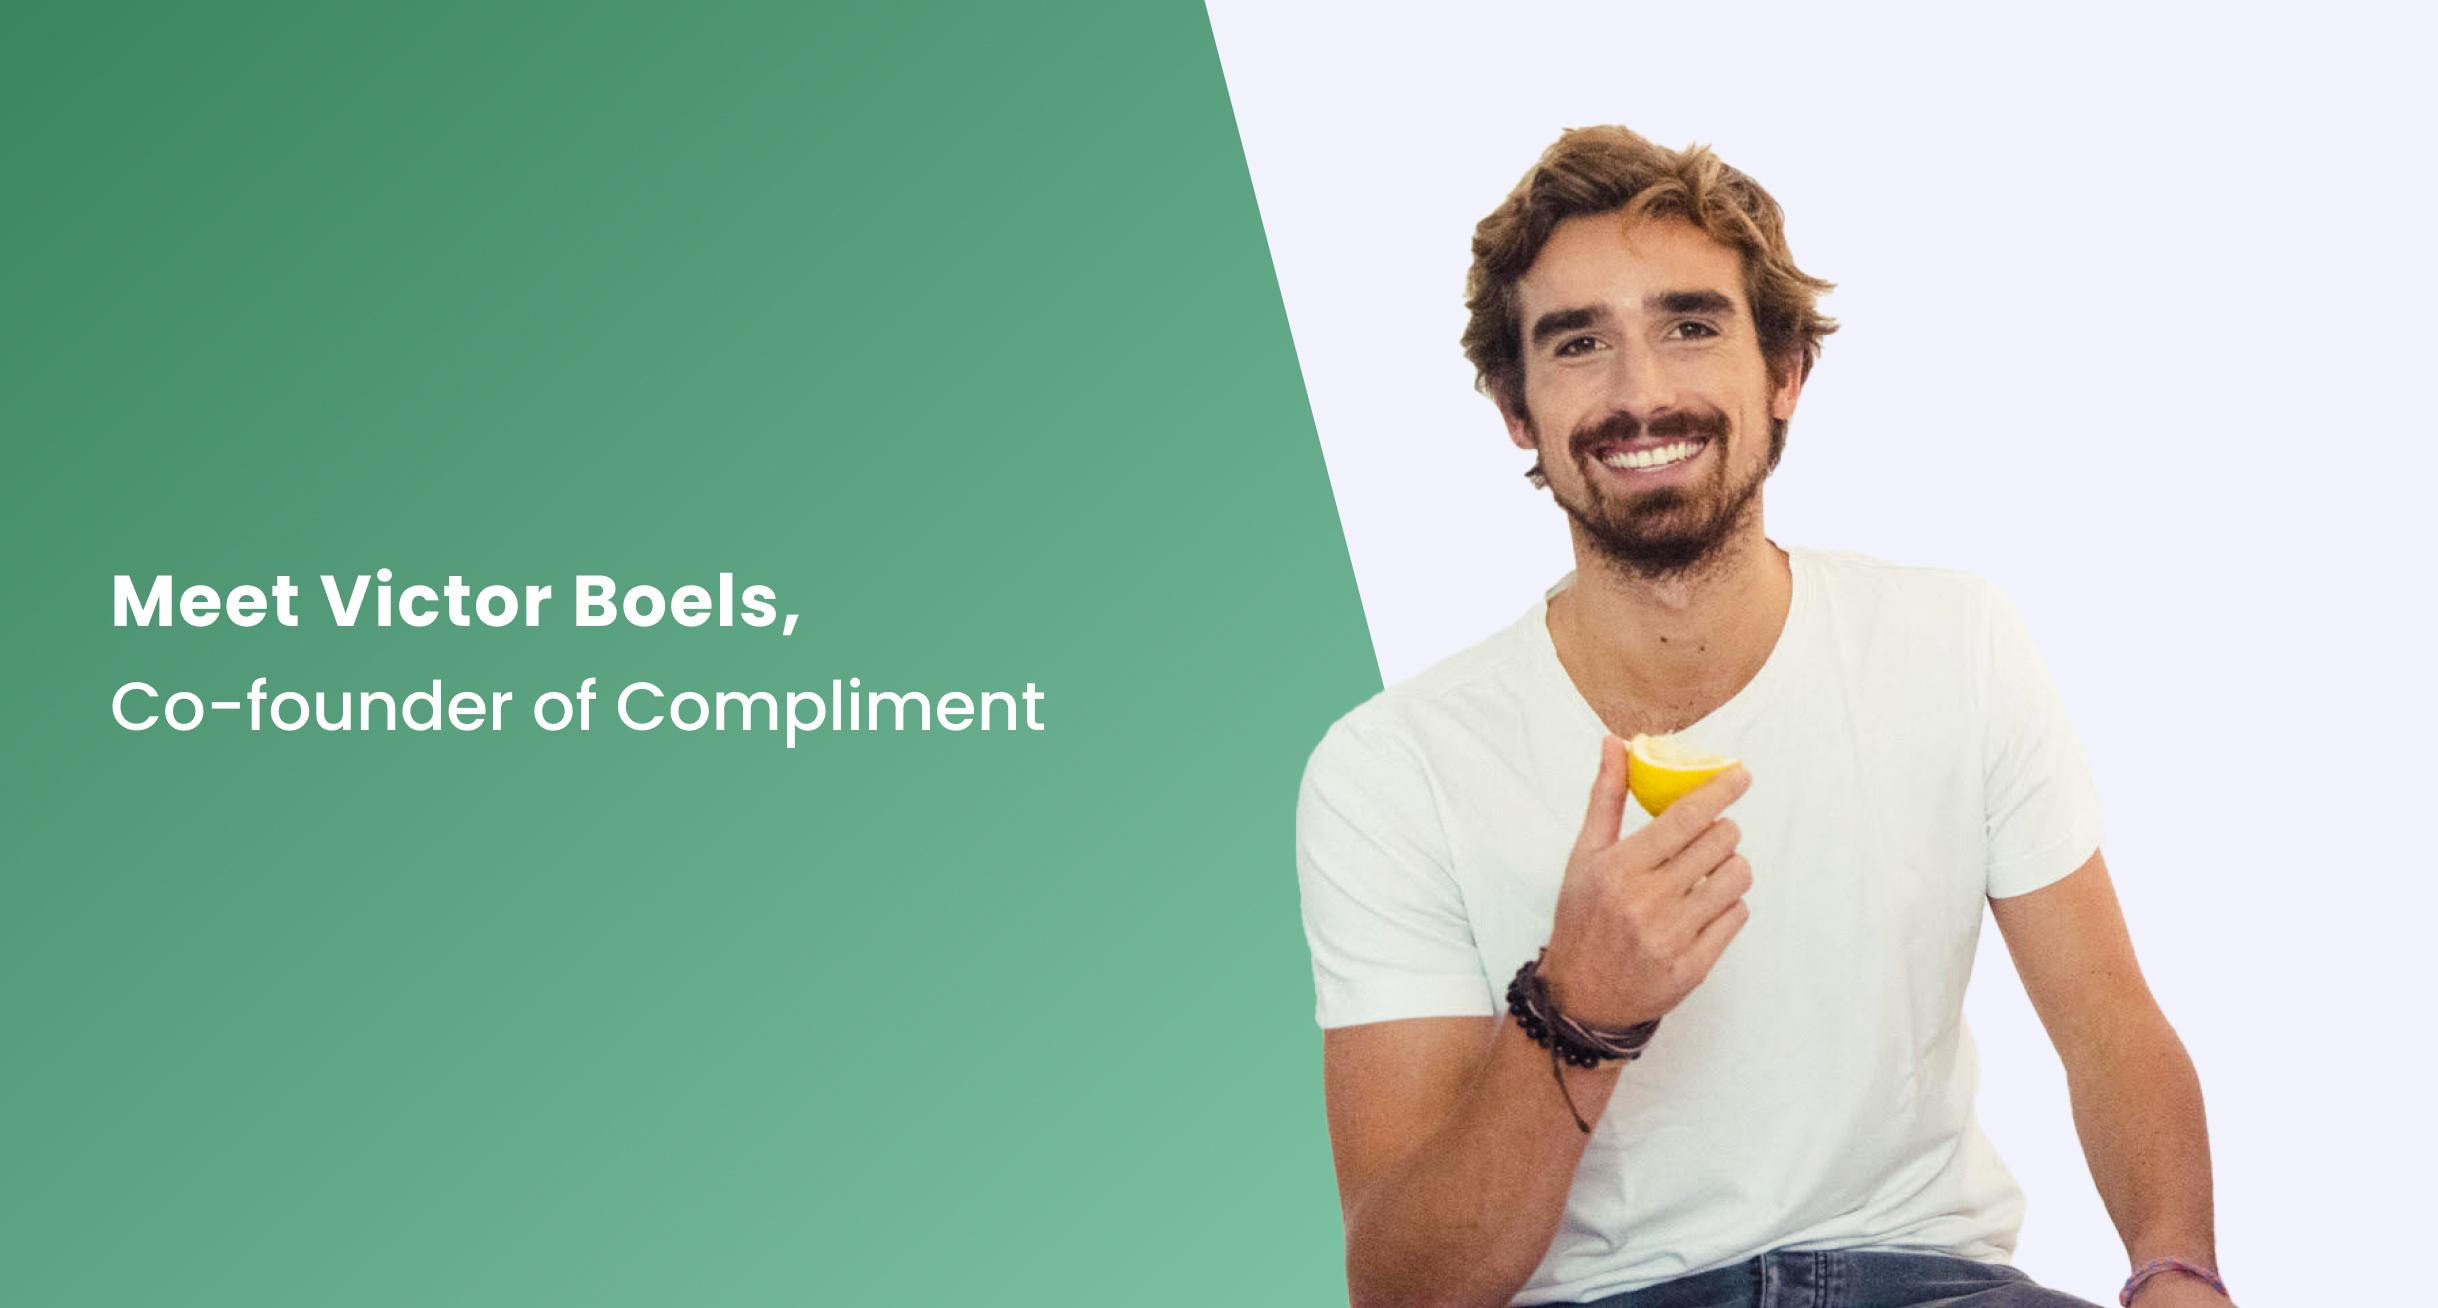 Nightborn - Meet Victor Boels, Co-founder of Compliment